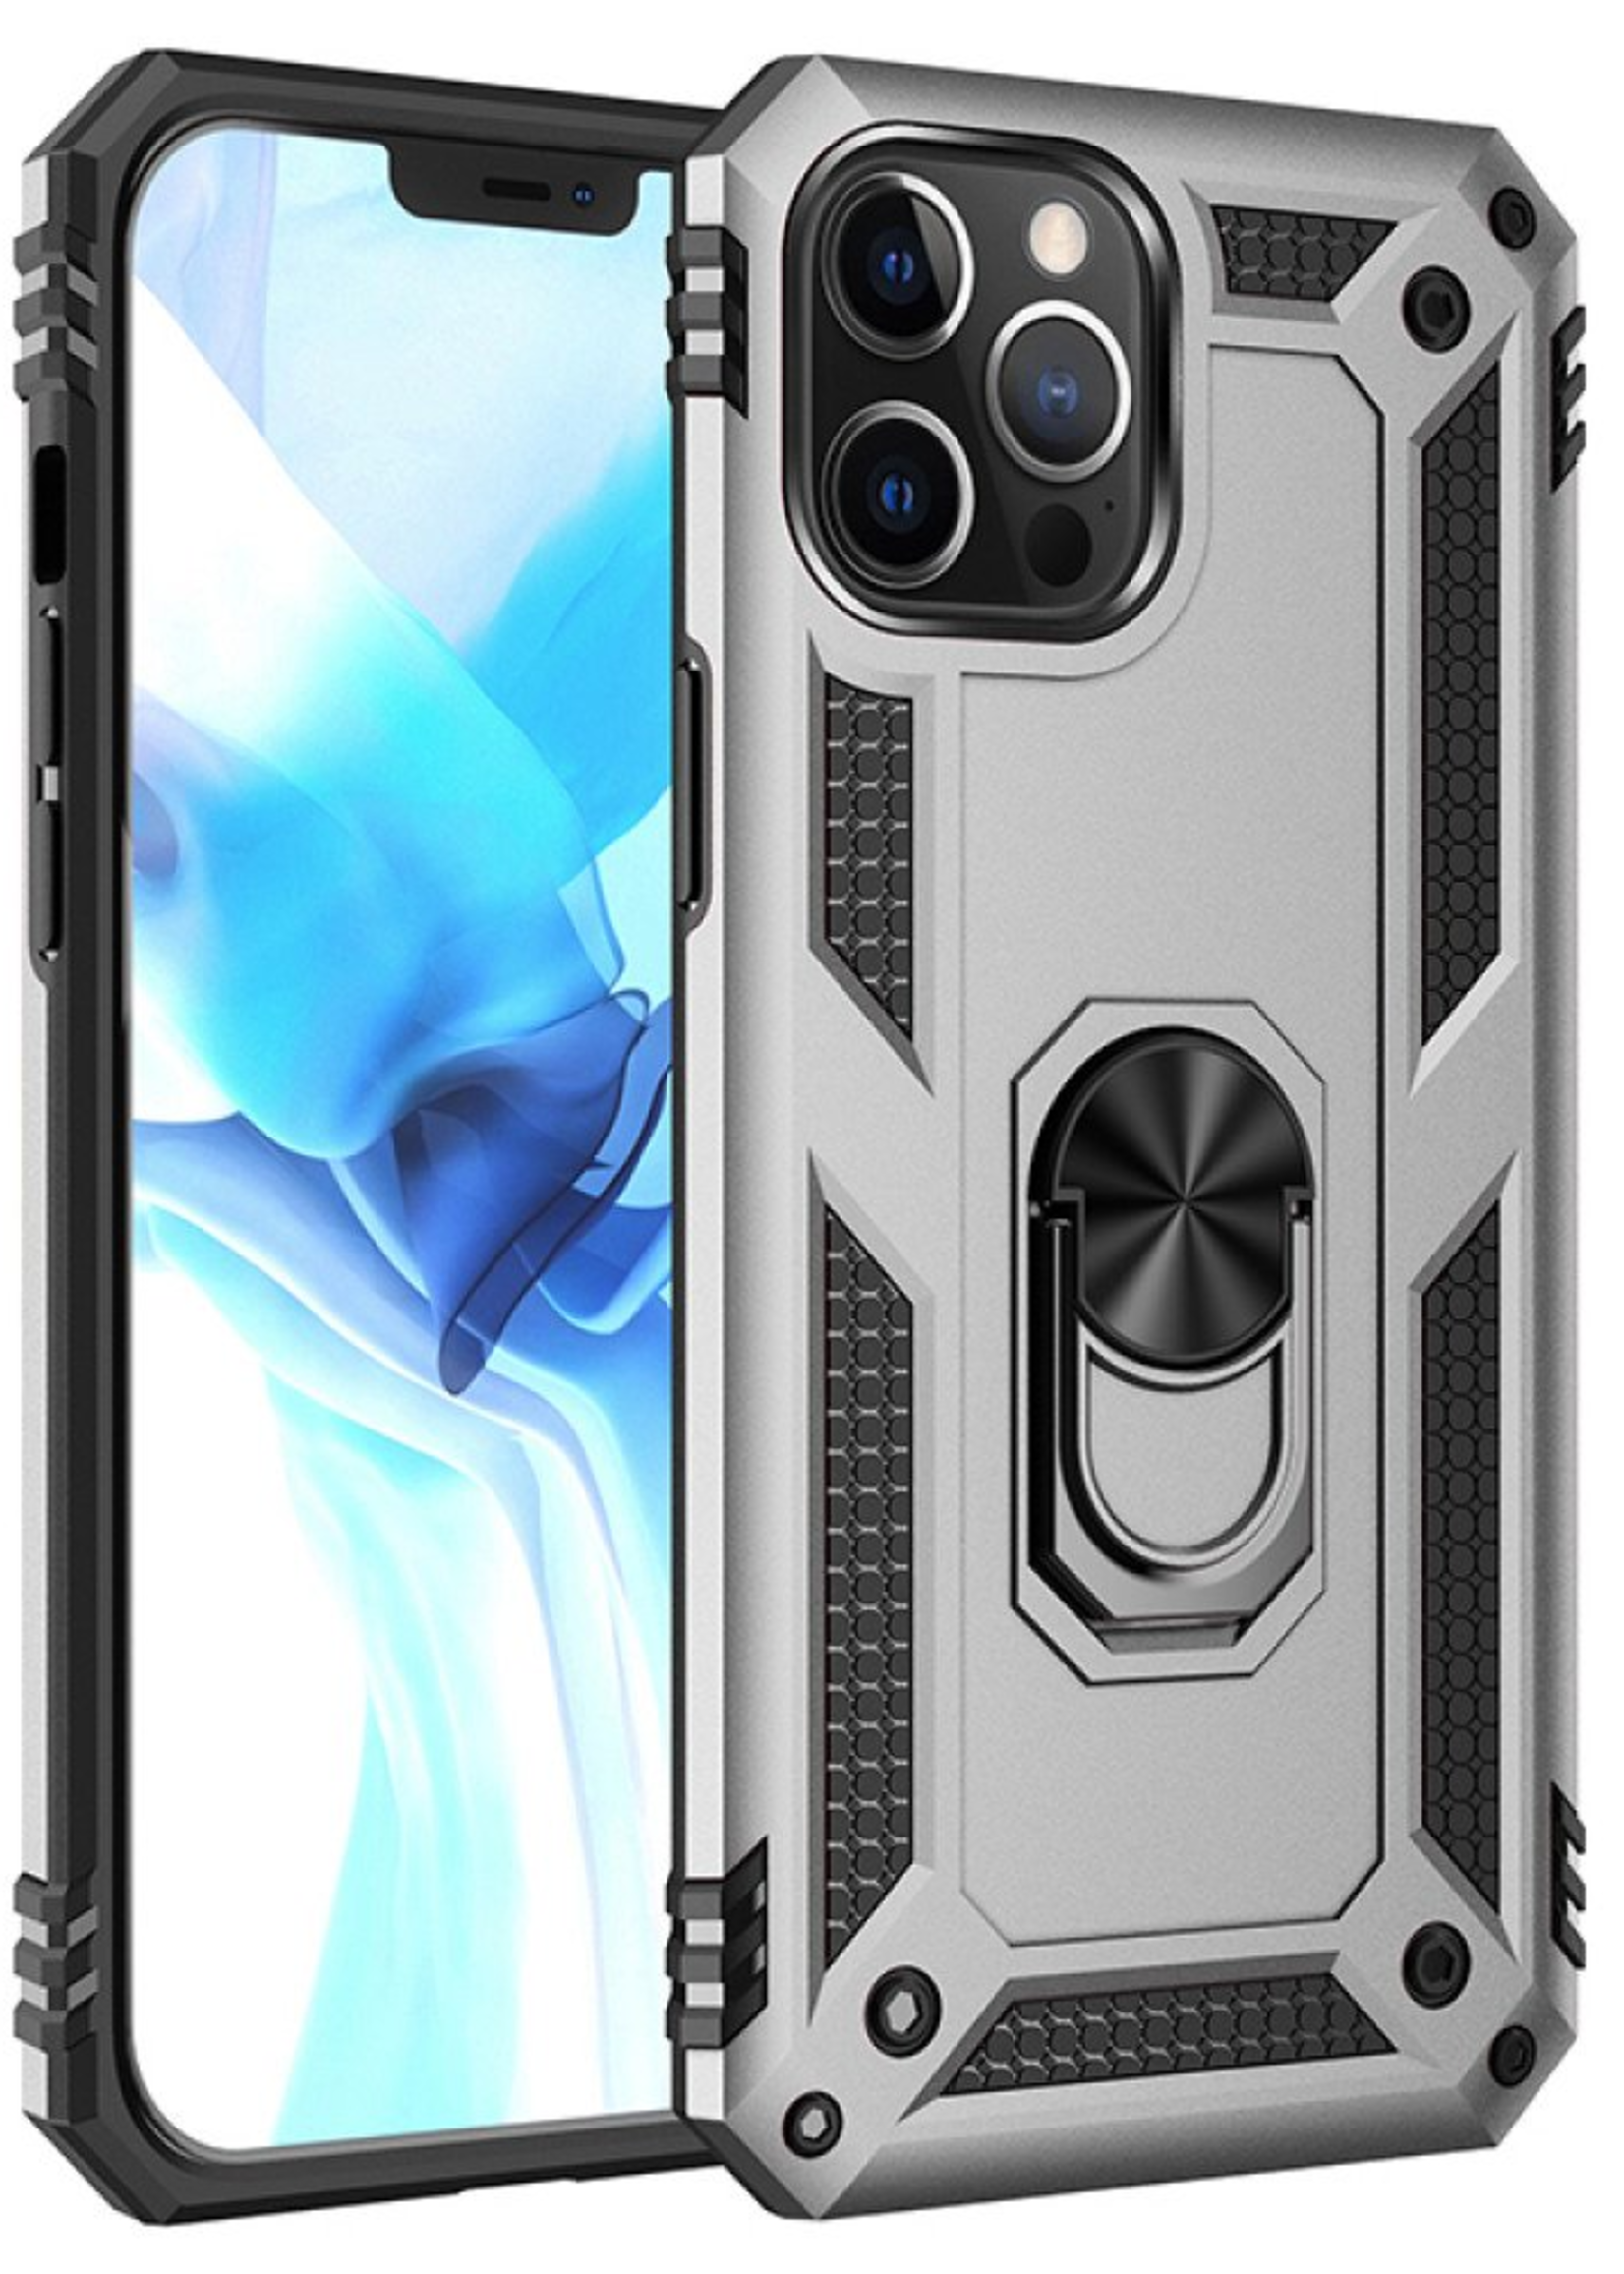 Apple Armor Hybrid Case w/ Kickstand for iPhone 12 Pro Max (silver)